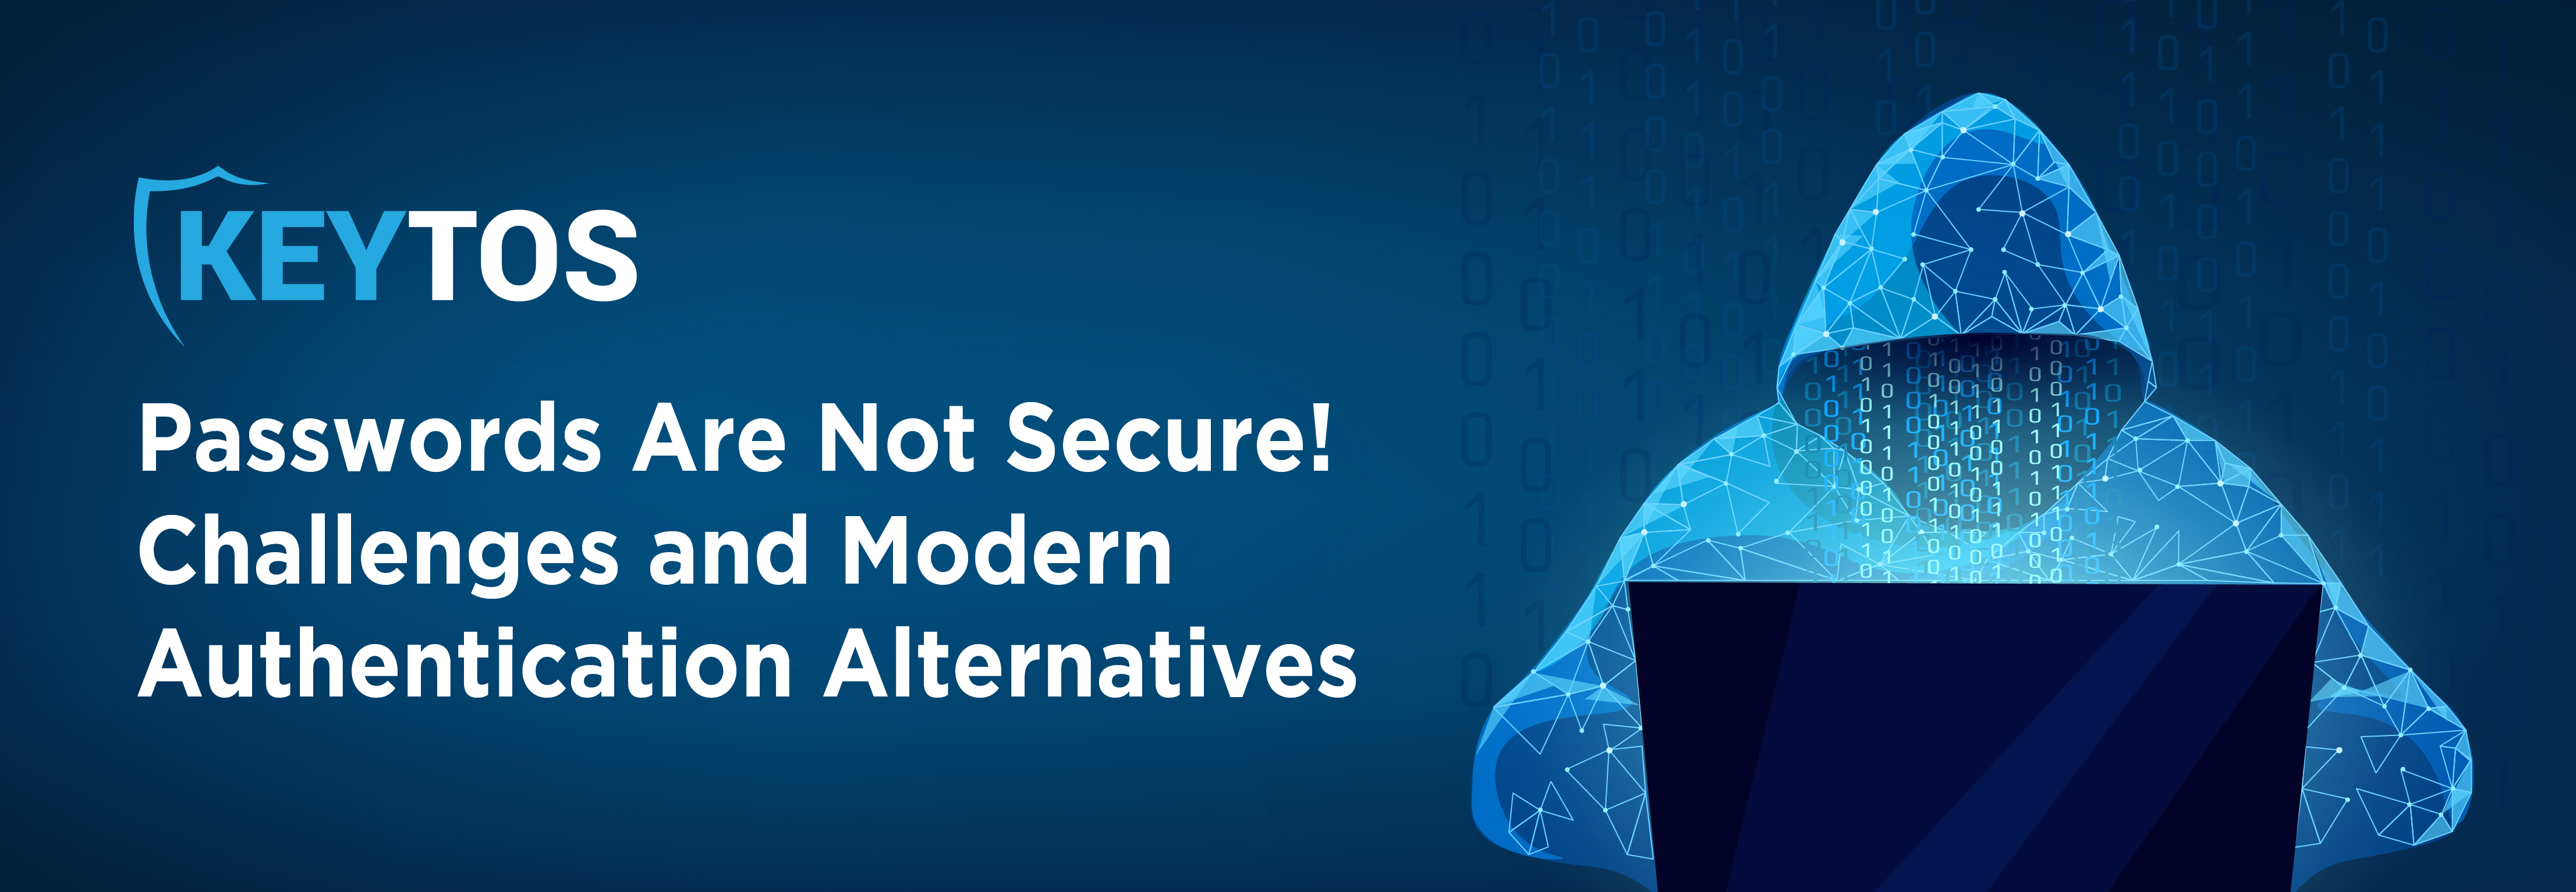 Are passwords secure? What are alternatives to passwords?